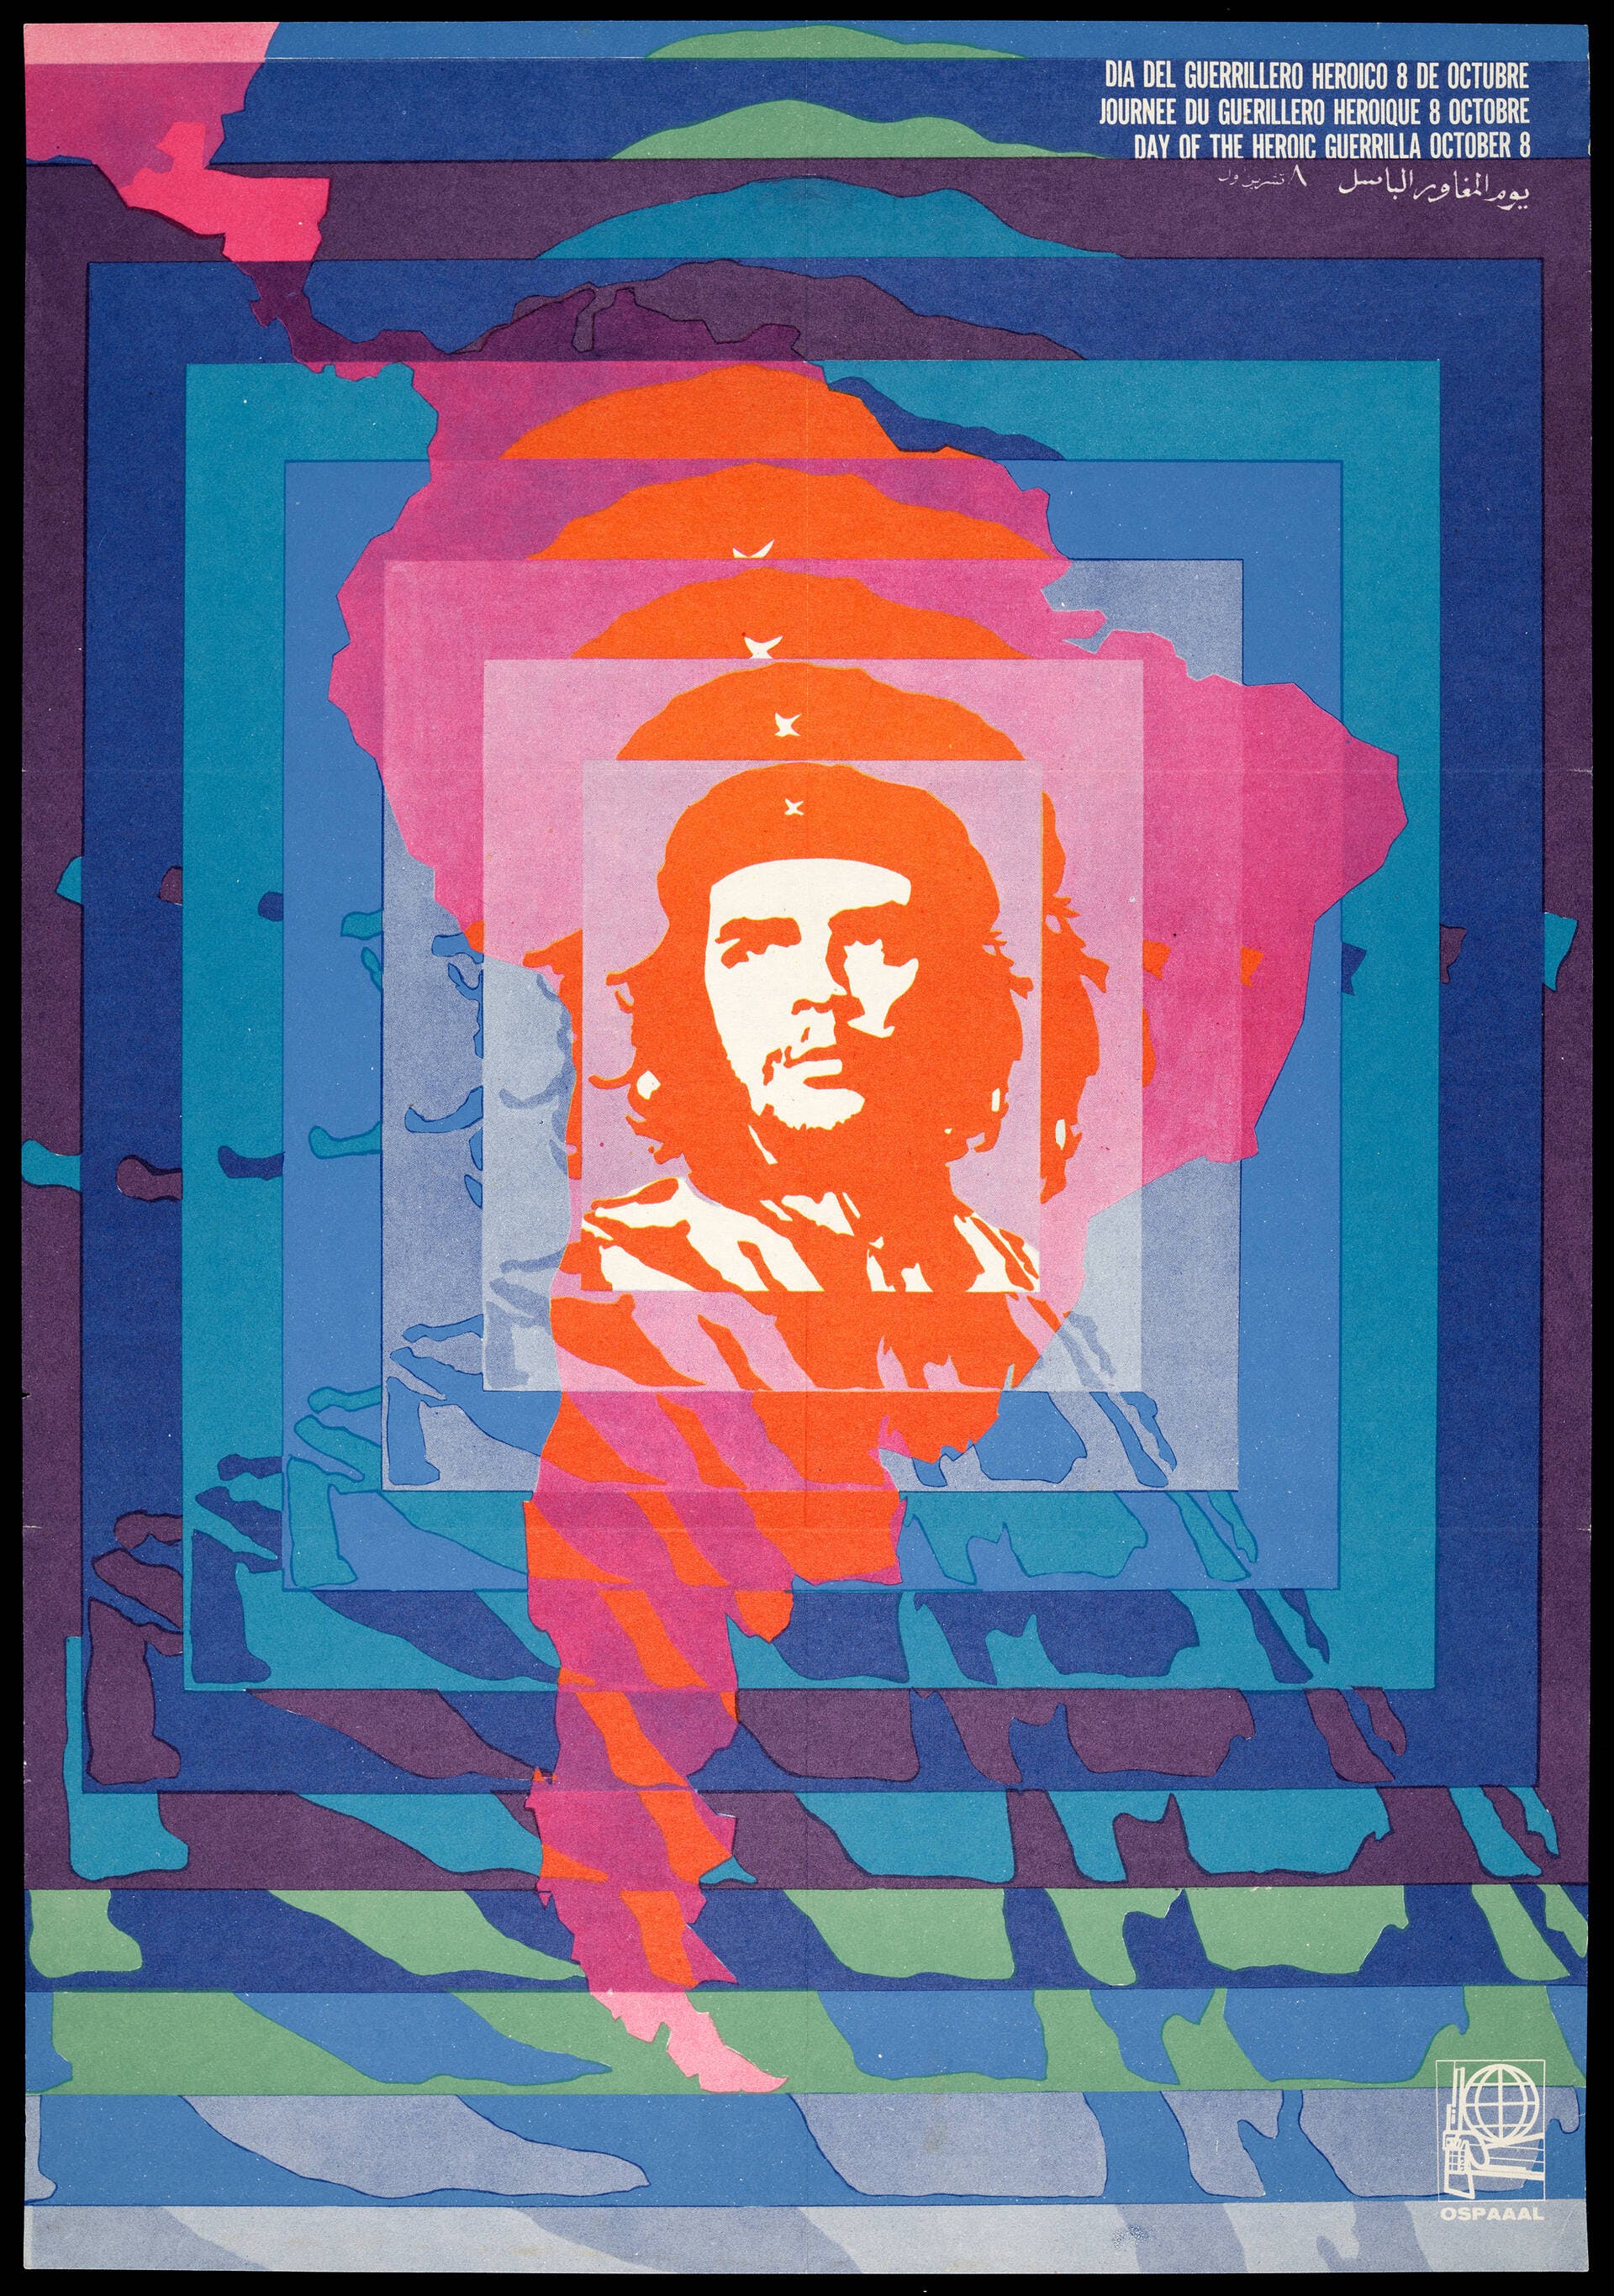 Day of the Heroic Guerrilla Fighter, October 8, poster, by Helena Serrano, for OSPAAAL, 1968, Cuba.